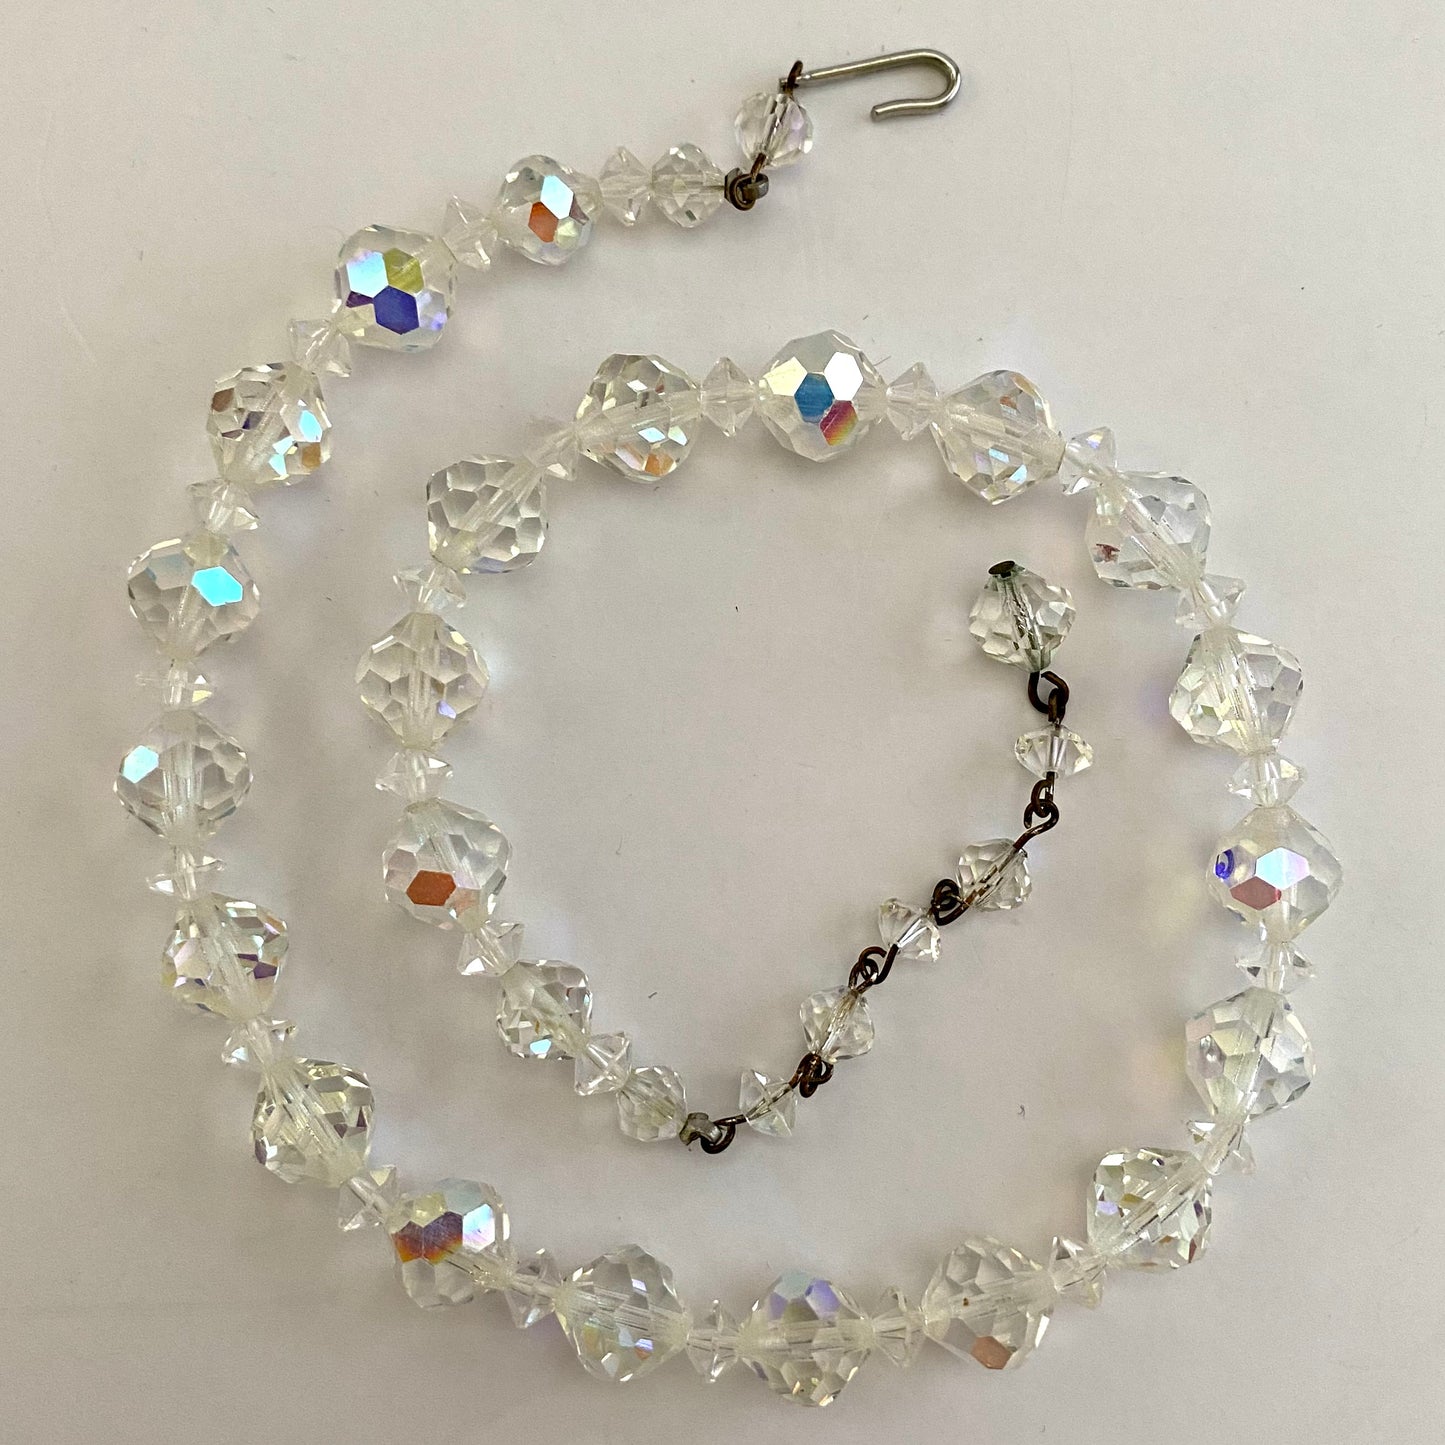 Late 50s/ Early 60s Classic Crystal Necklace